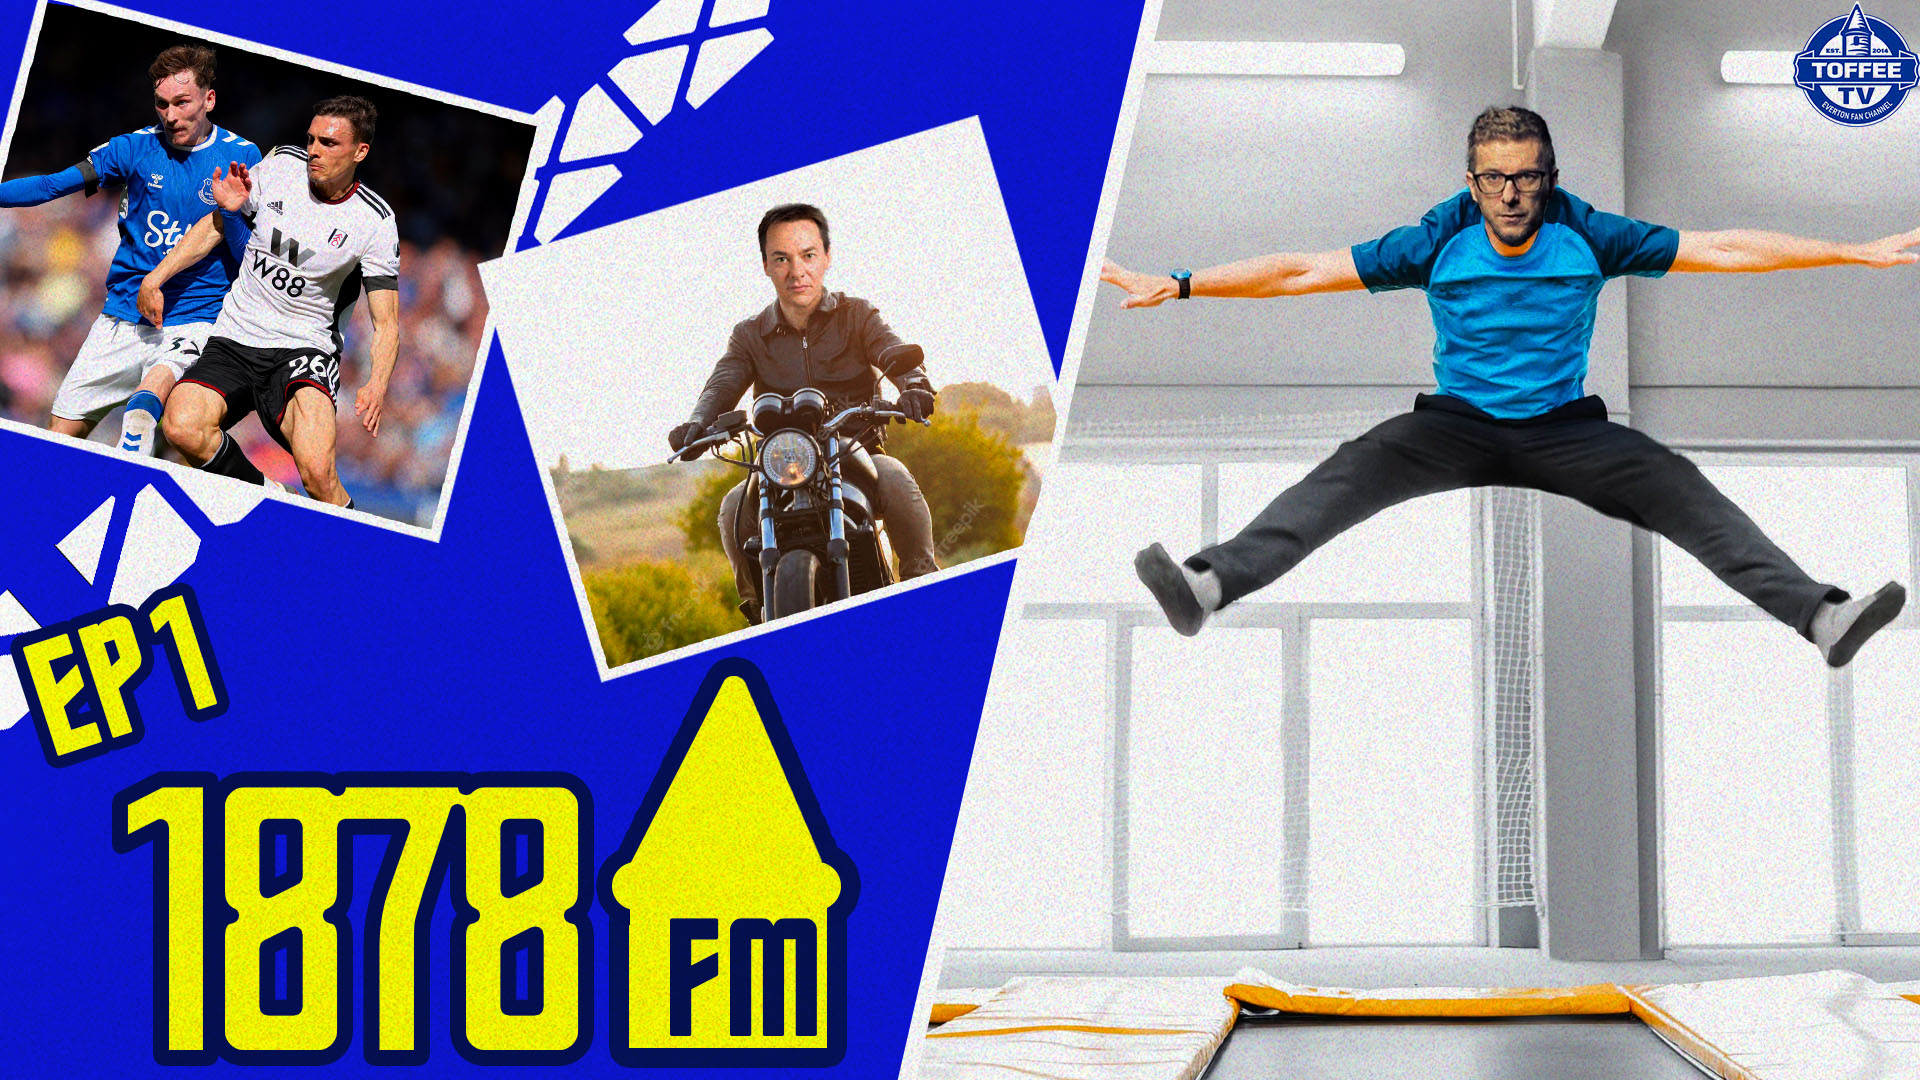 Featured image for “Everton 0-1 Fulham | Bush’s Trampoline Adventure | Is Dave Vitty Really On The Run? | 1878 FM S2 Ep 1”